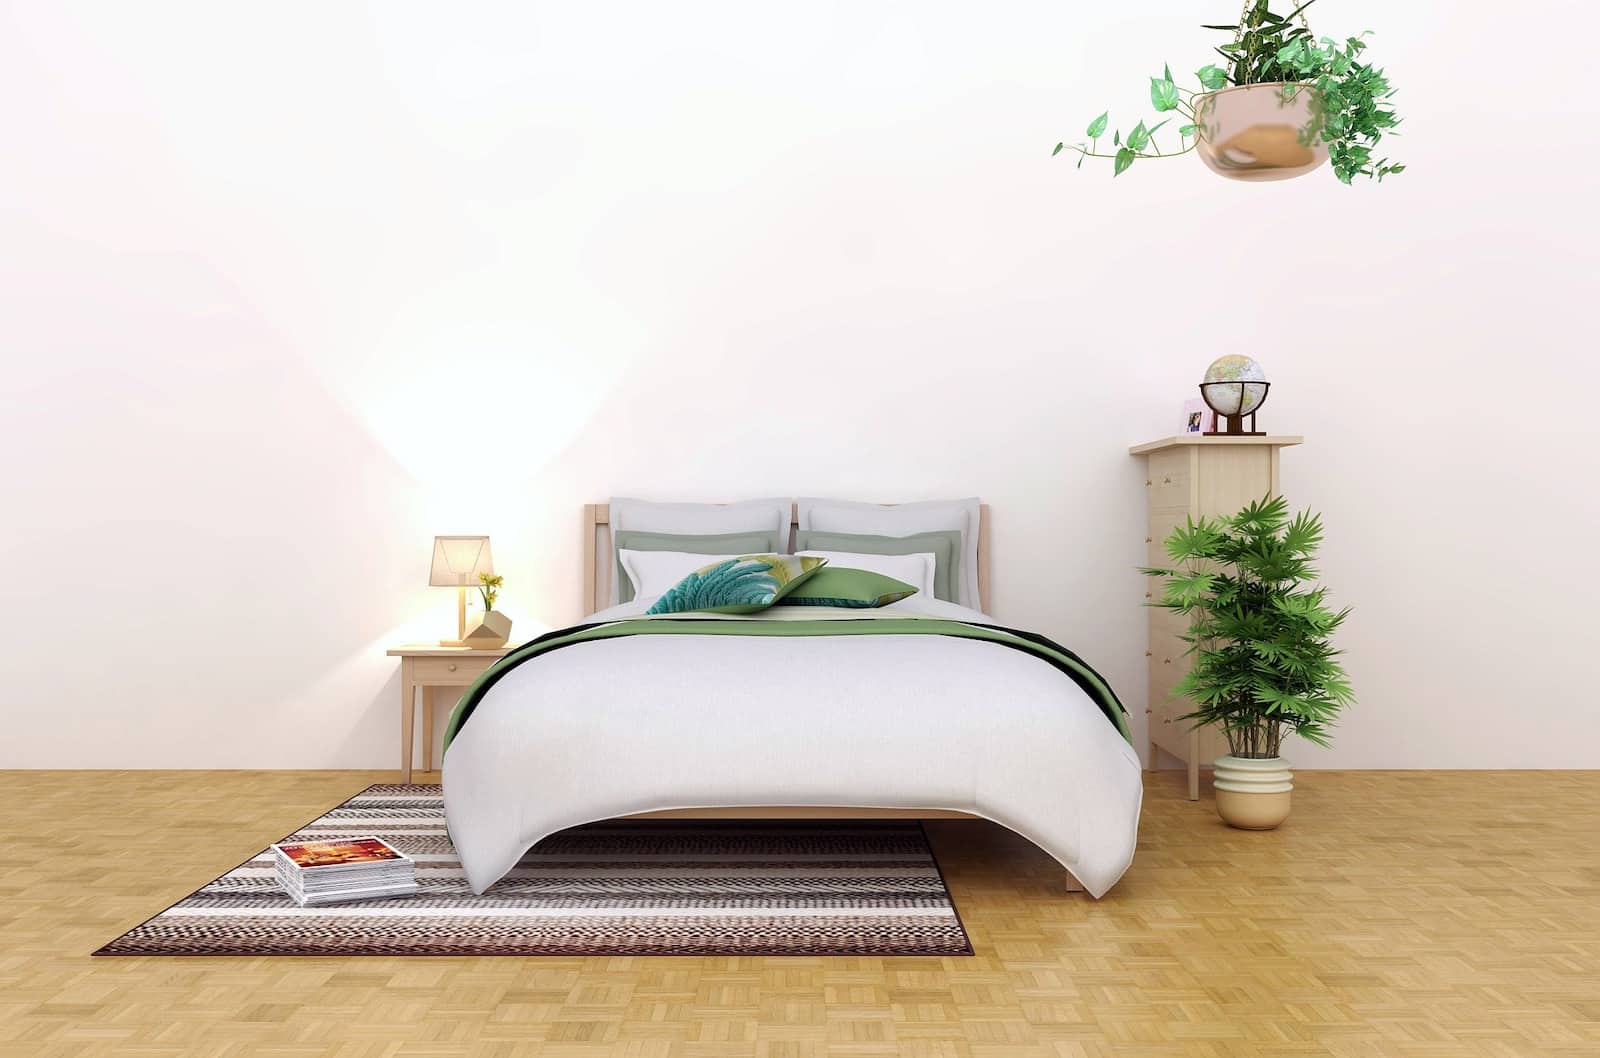 A bed from a distance, with light green and grey bedding. There is a rug under it. A plant sits next to the bed and another plant hangs from the ceiling